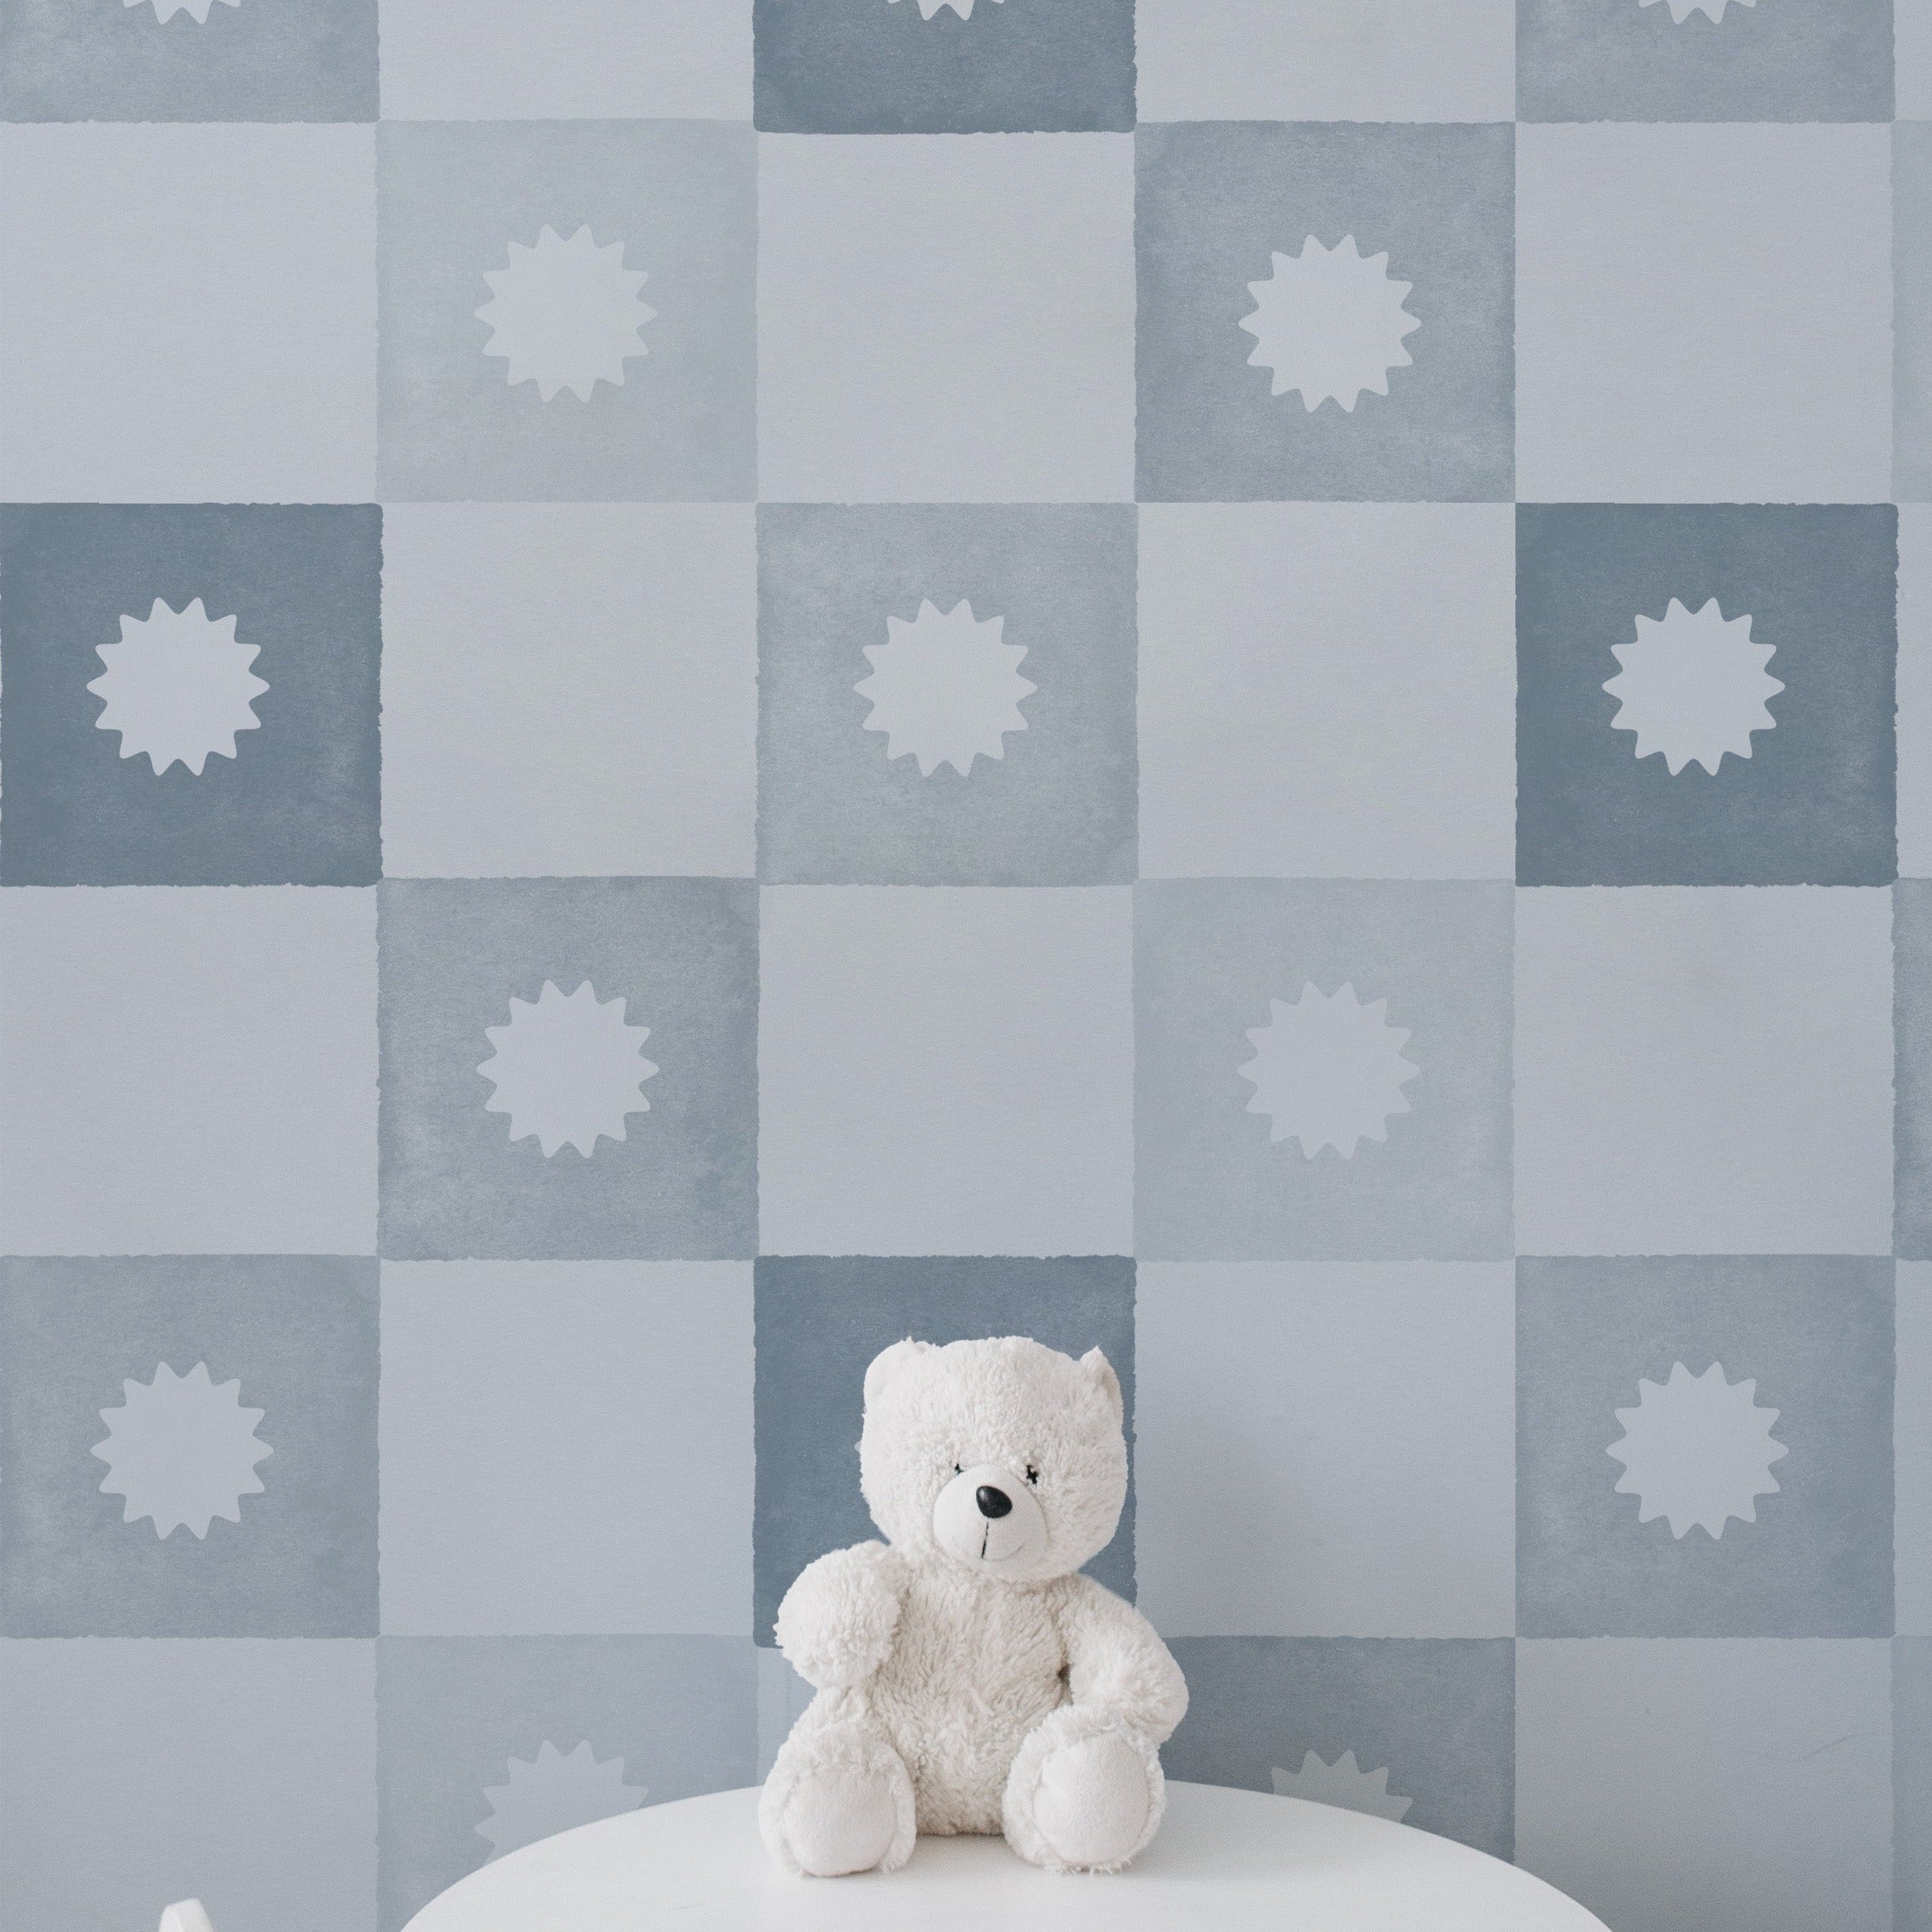 A nursery setting showing the Coralie Wallpaper in pale blue on the wall, decorated with a checkered pattern of pale blue and white squares, each with a centered sunburst motif. The scene includes a white teddy bear sitting on a white round table